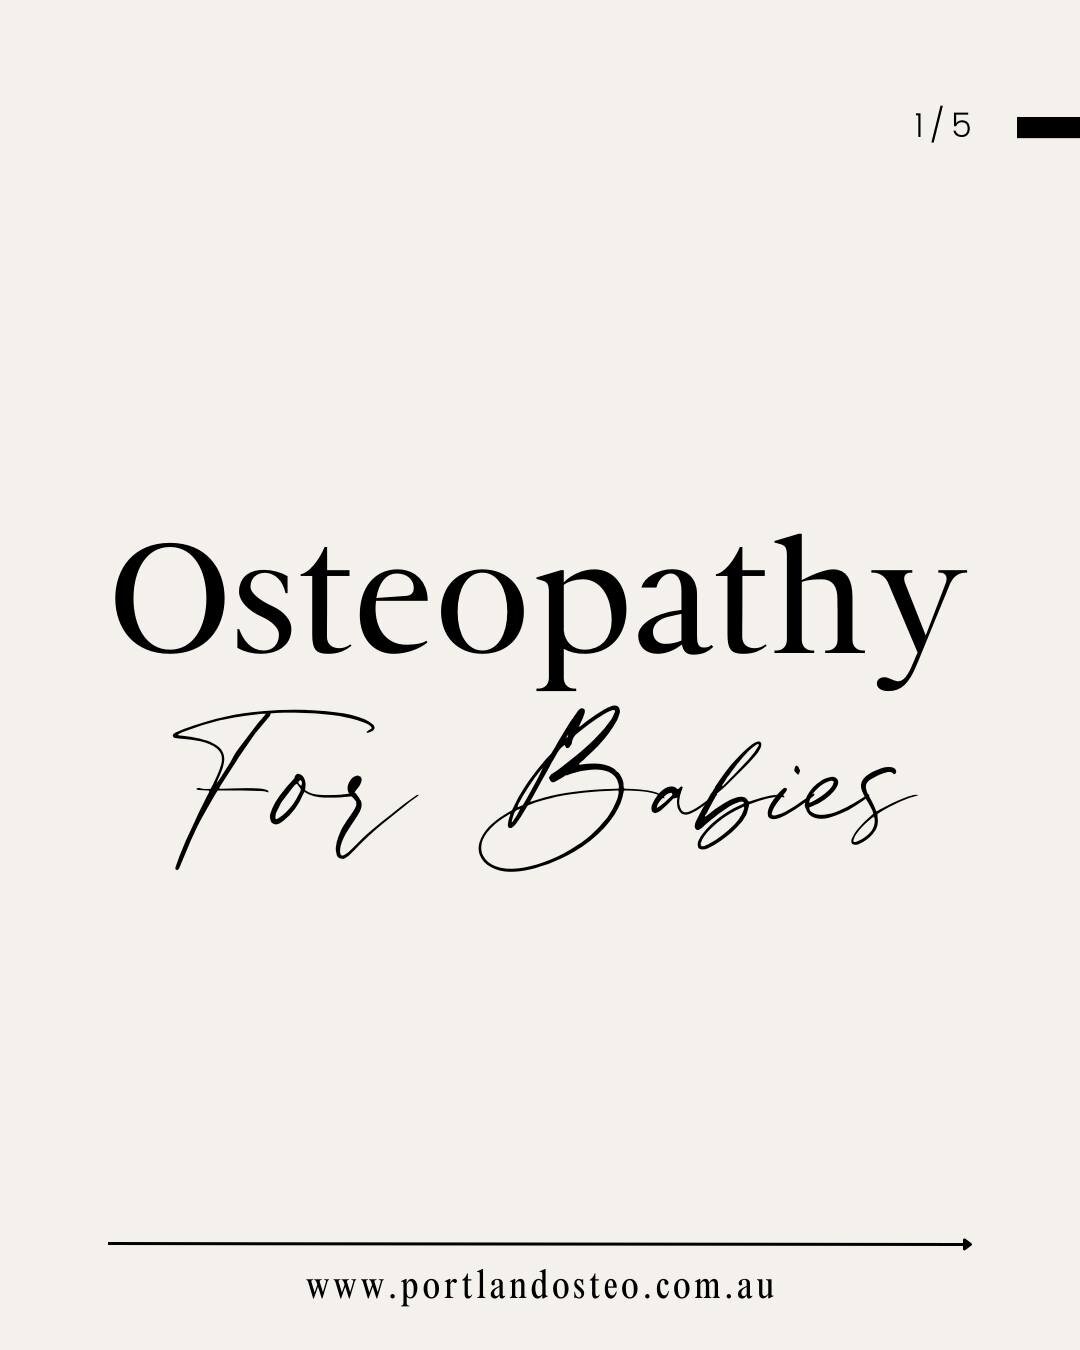 The pressures experienced by your baby during pregnancy and childbirth can lead to strains and stresses, especially if your baby had a traumatic birth or forceps/ventouse were used in the delivery 🛠️🪠

Dr. Michelle Sherriff (osteopath) has many yea